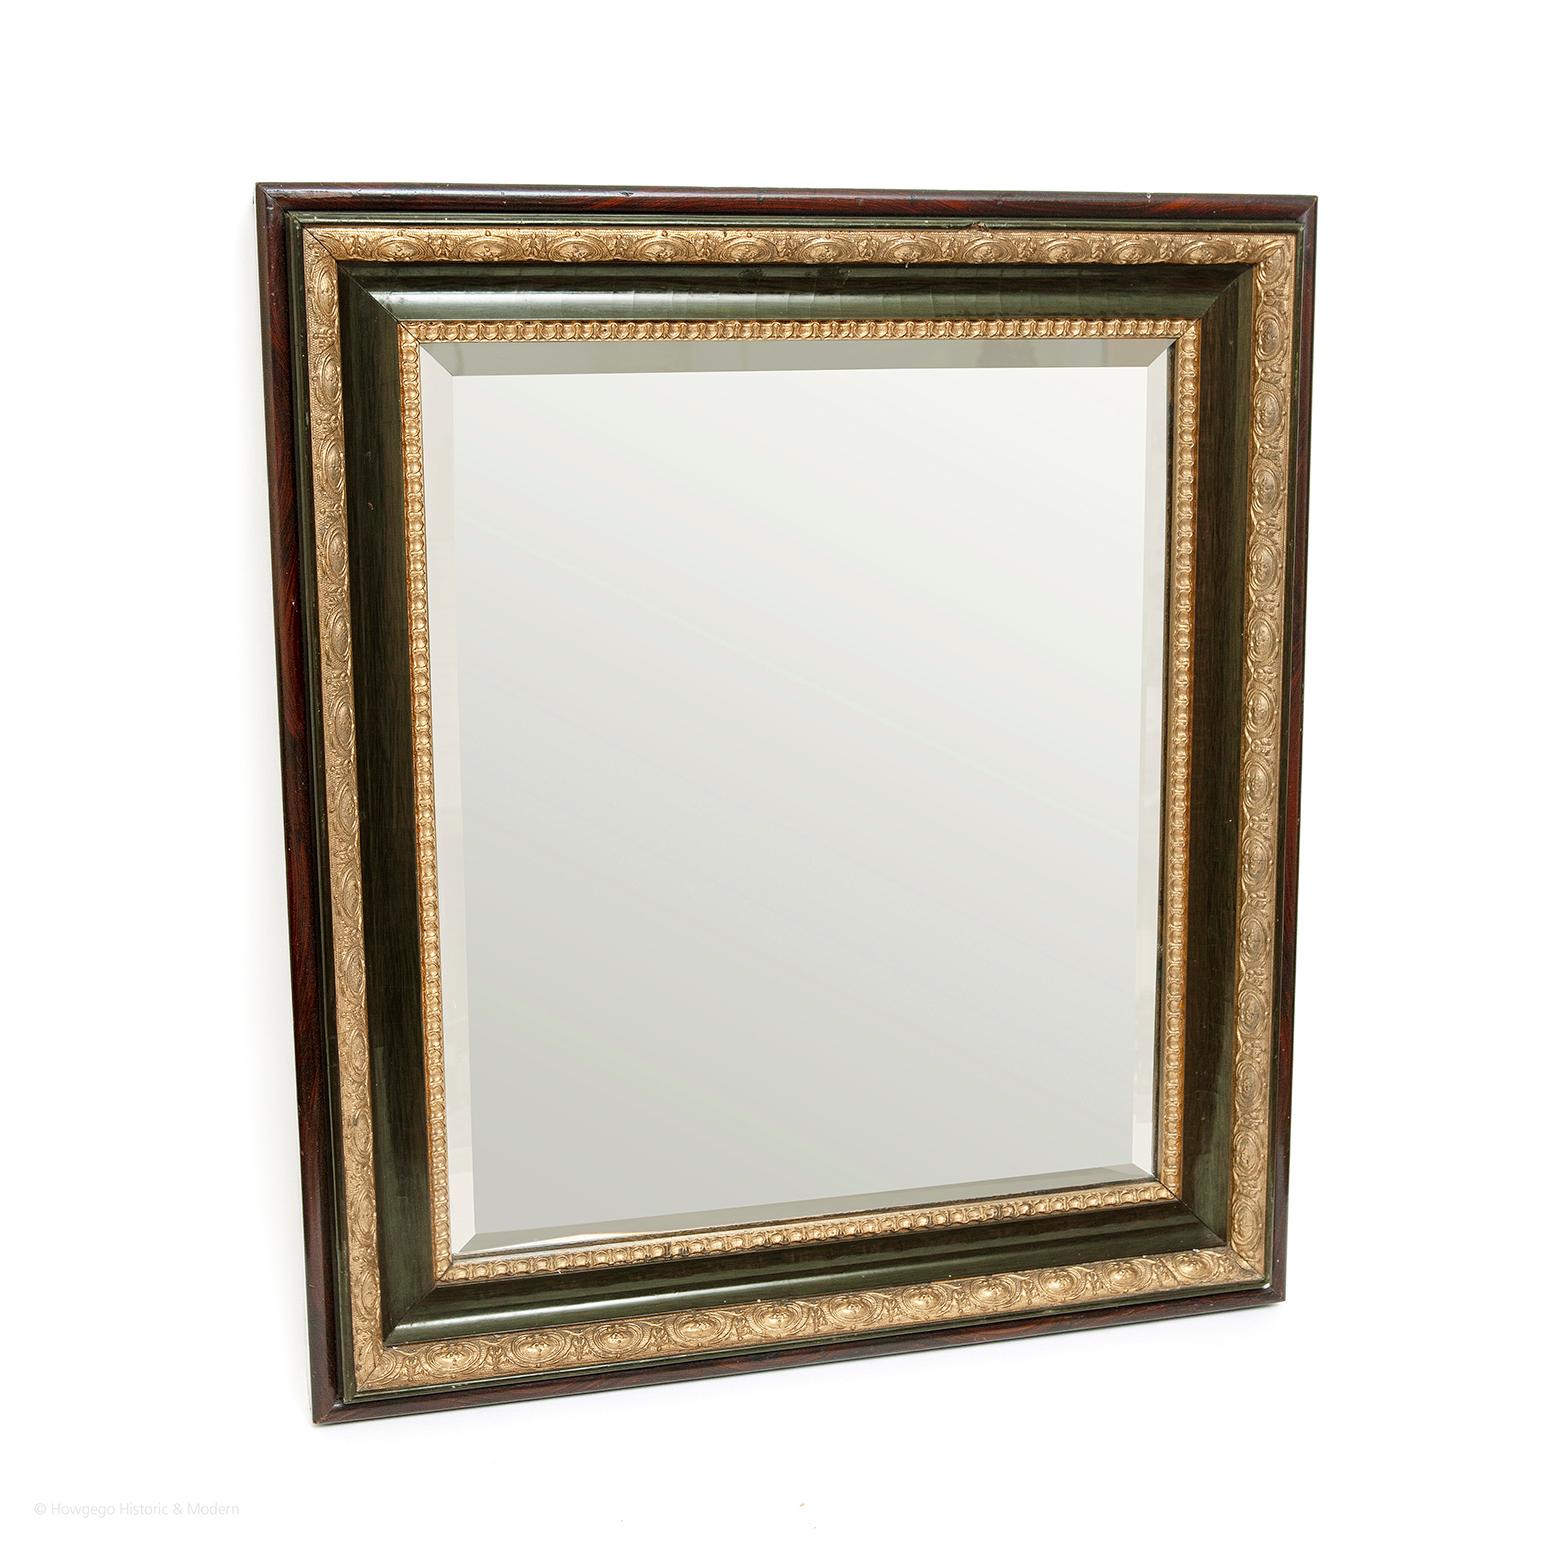 French Mirror Neoclassical Green Lacquerwork Woodgrain Original Bevelled Plate Ormolu For Sale